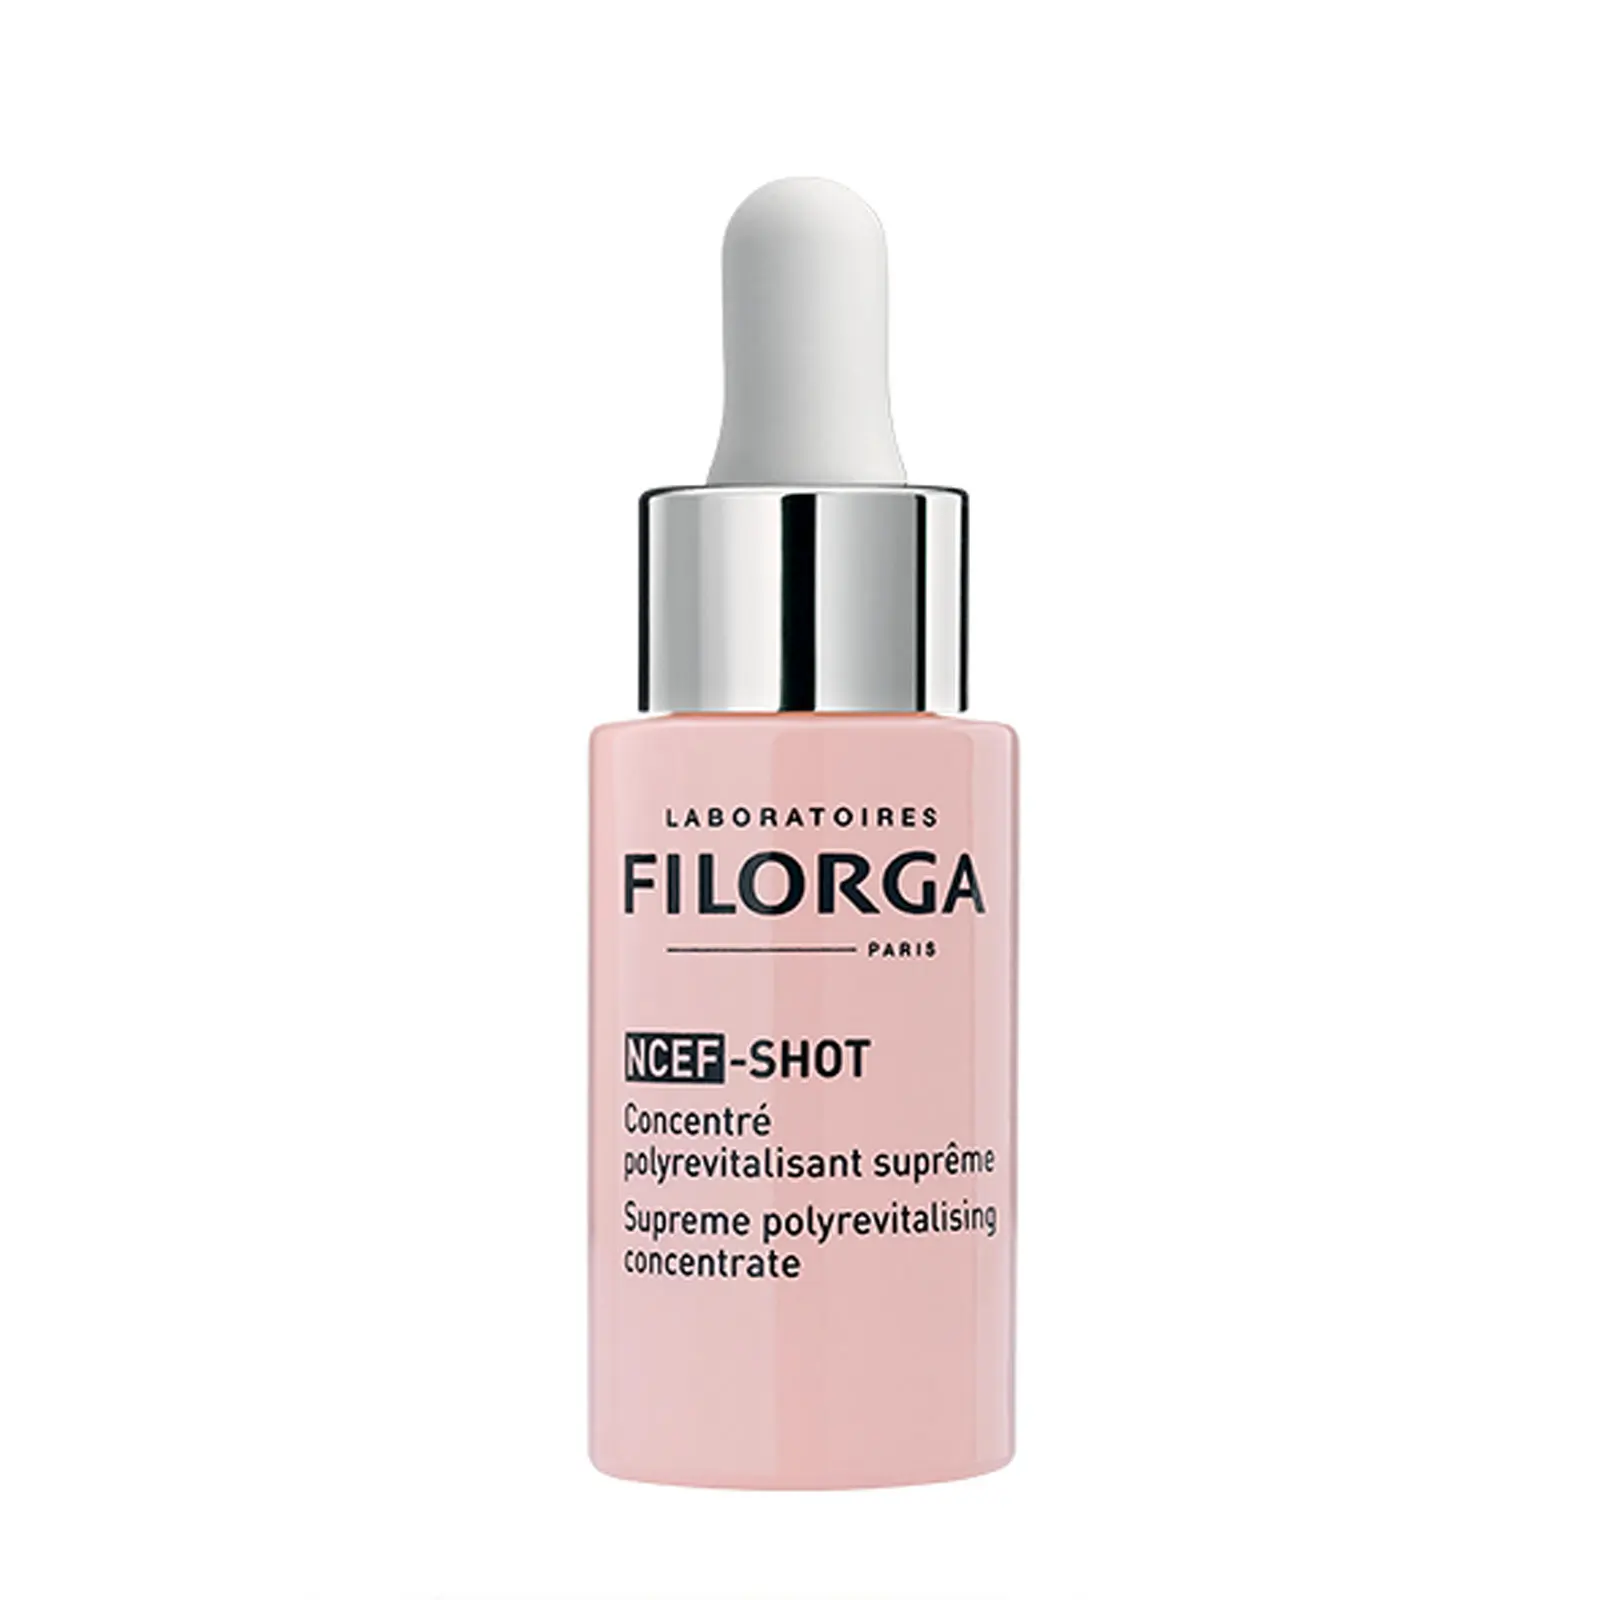 FILORGA NCEF-SHOT: Supreme Polyrevitalising Concentrate 15ml Discounts and Cashback